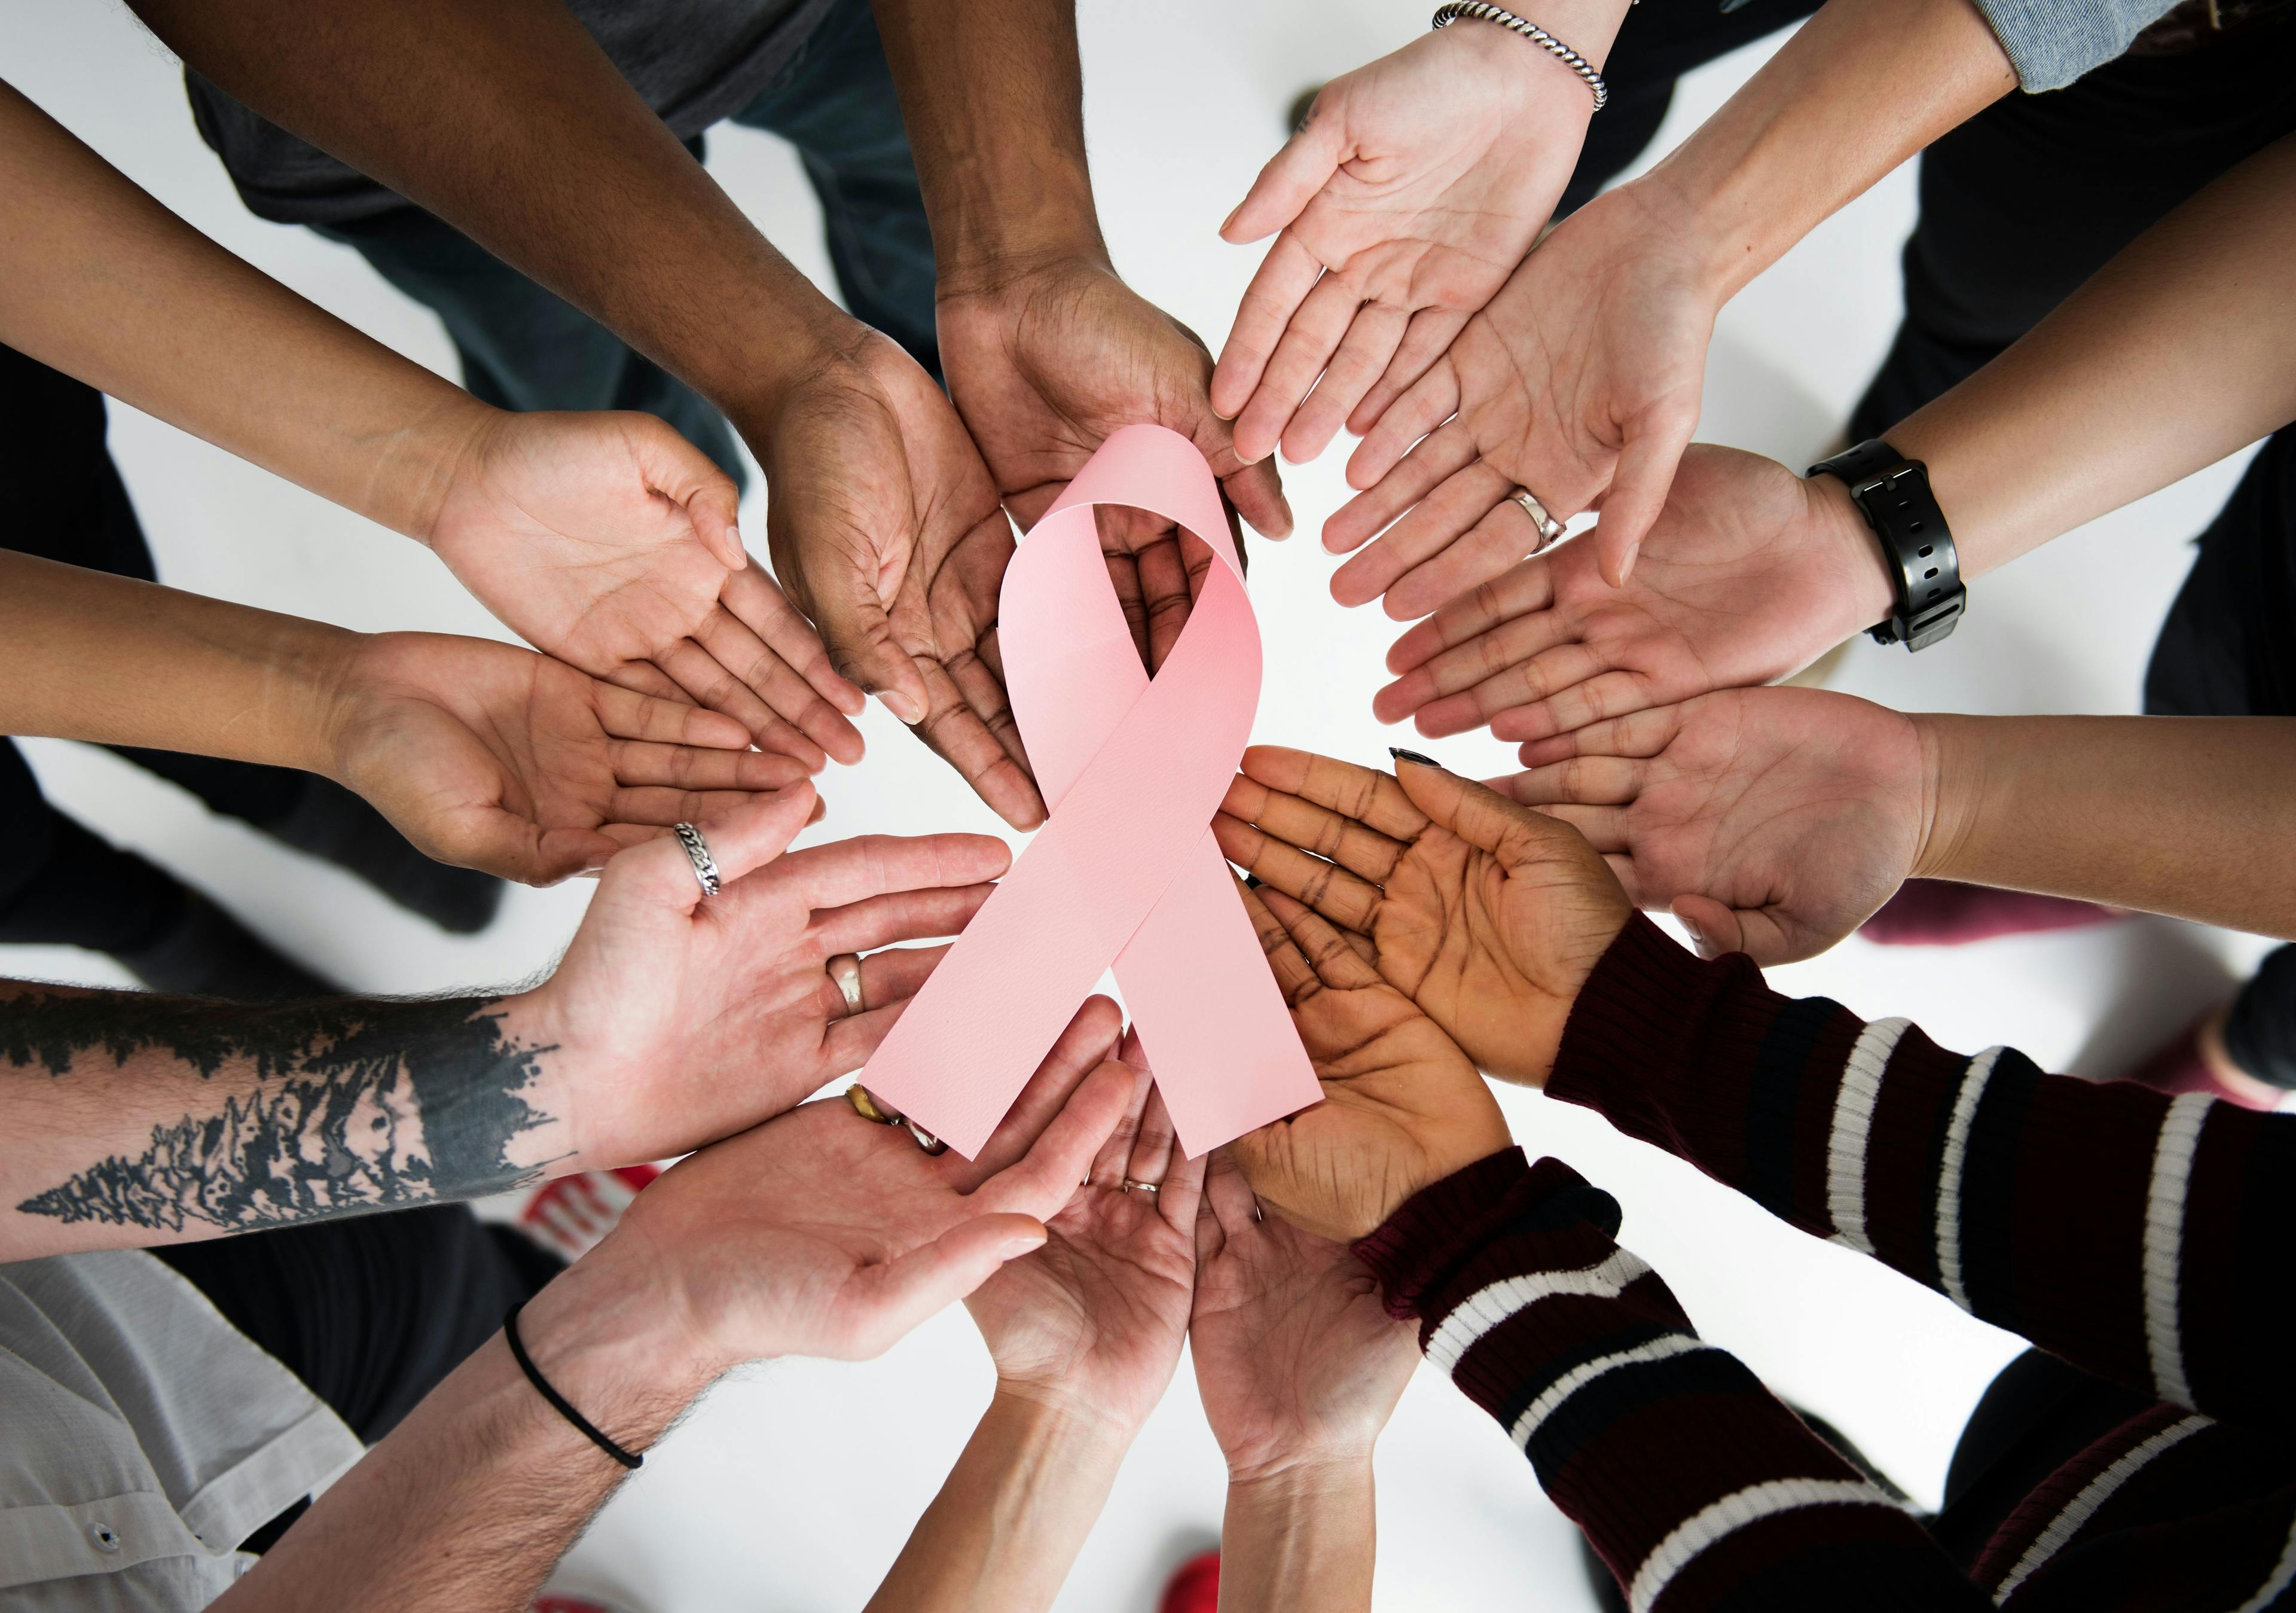 group of patinets holding a brast cancer awareness ribbon | Image credit: Rawpixel.com - stock.adobe.com